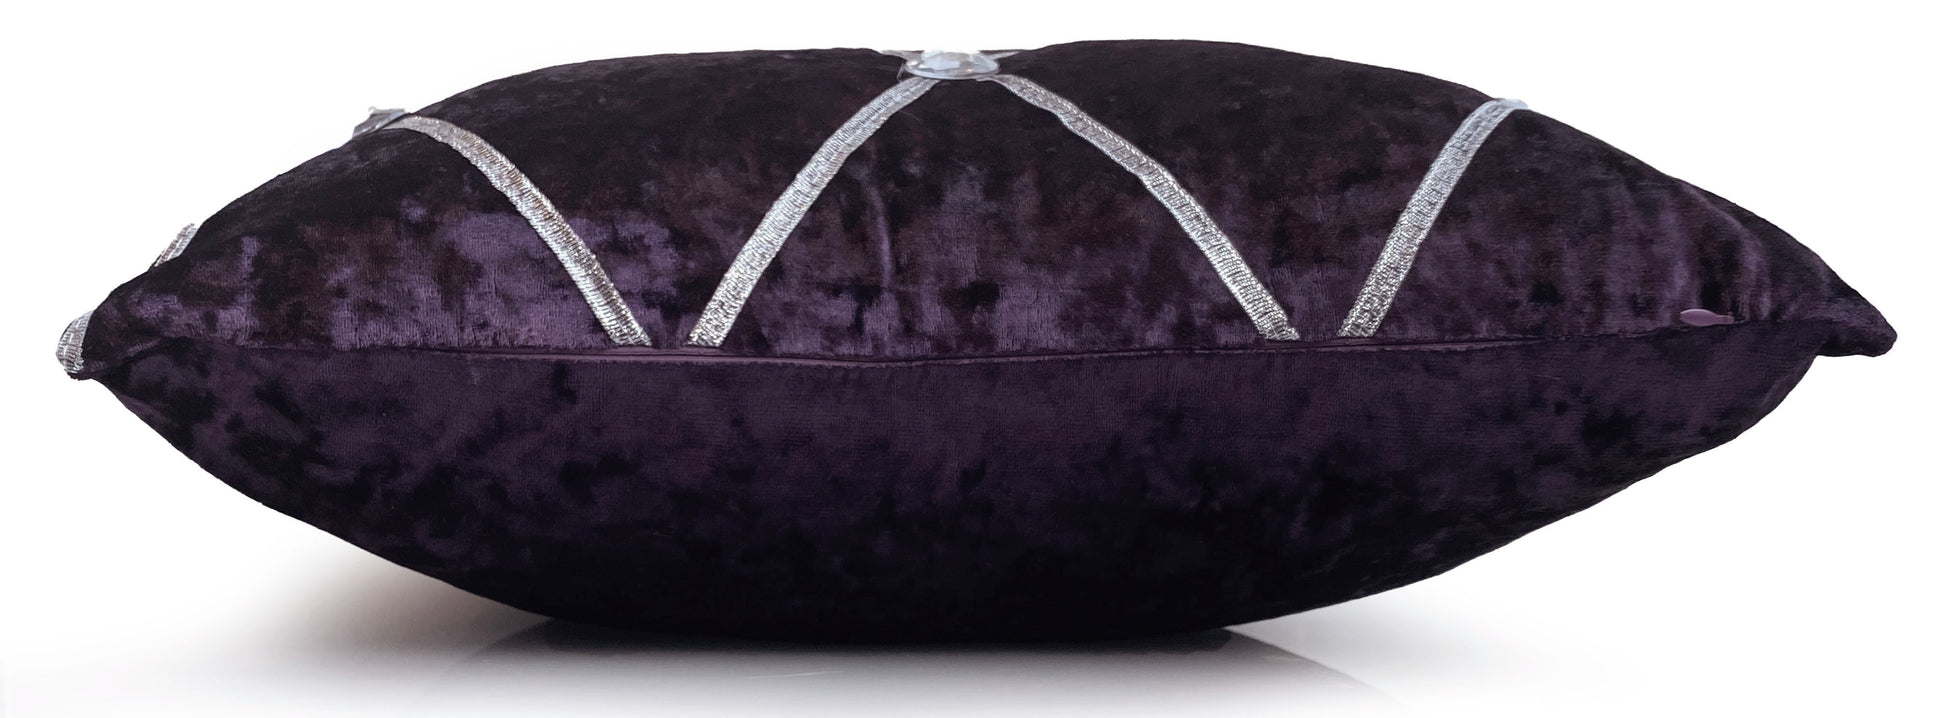 Large Crush Velvet Cushions or Covers Diamante Chesterfield  3 Sizes PURPLE side view